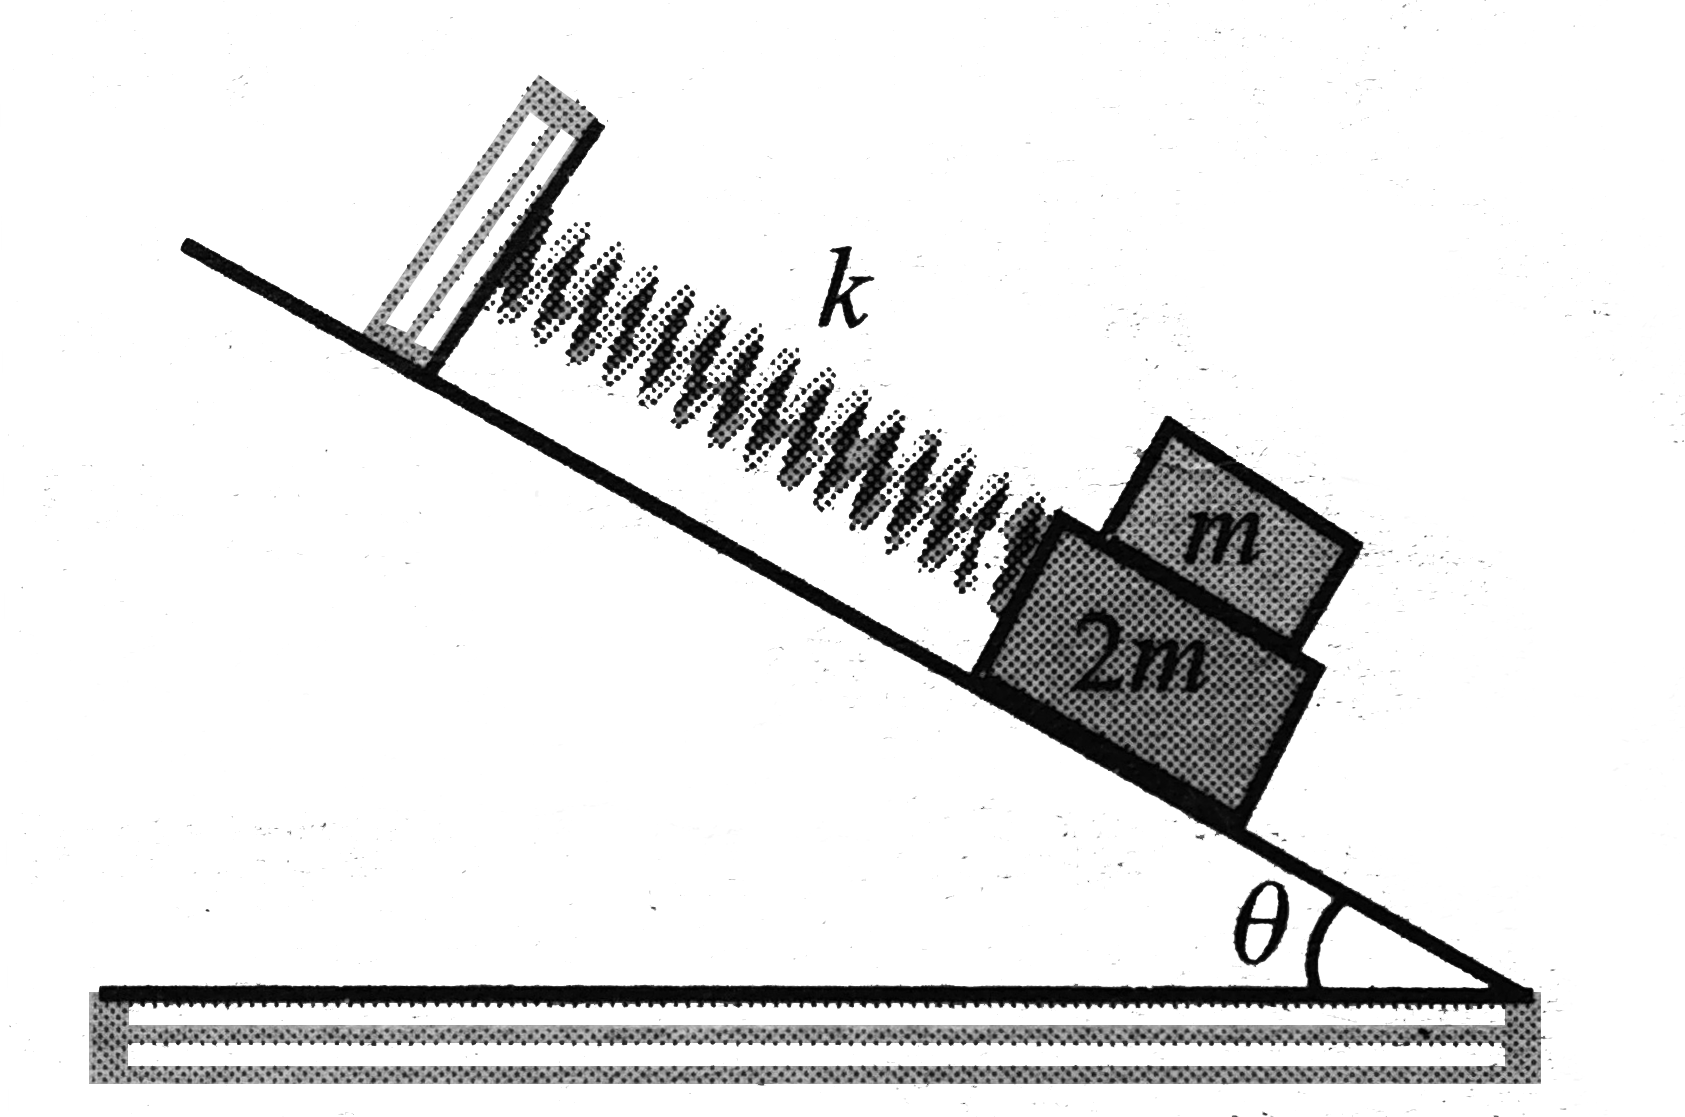 The coefficient of friction between block of mass m and 2m is mu=2tantheta. There is no friction between block of mass 2 m and inclined plane. The maximum amplitude of the two block system for which there is no relative motion between both the blocks is